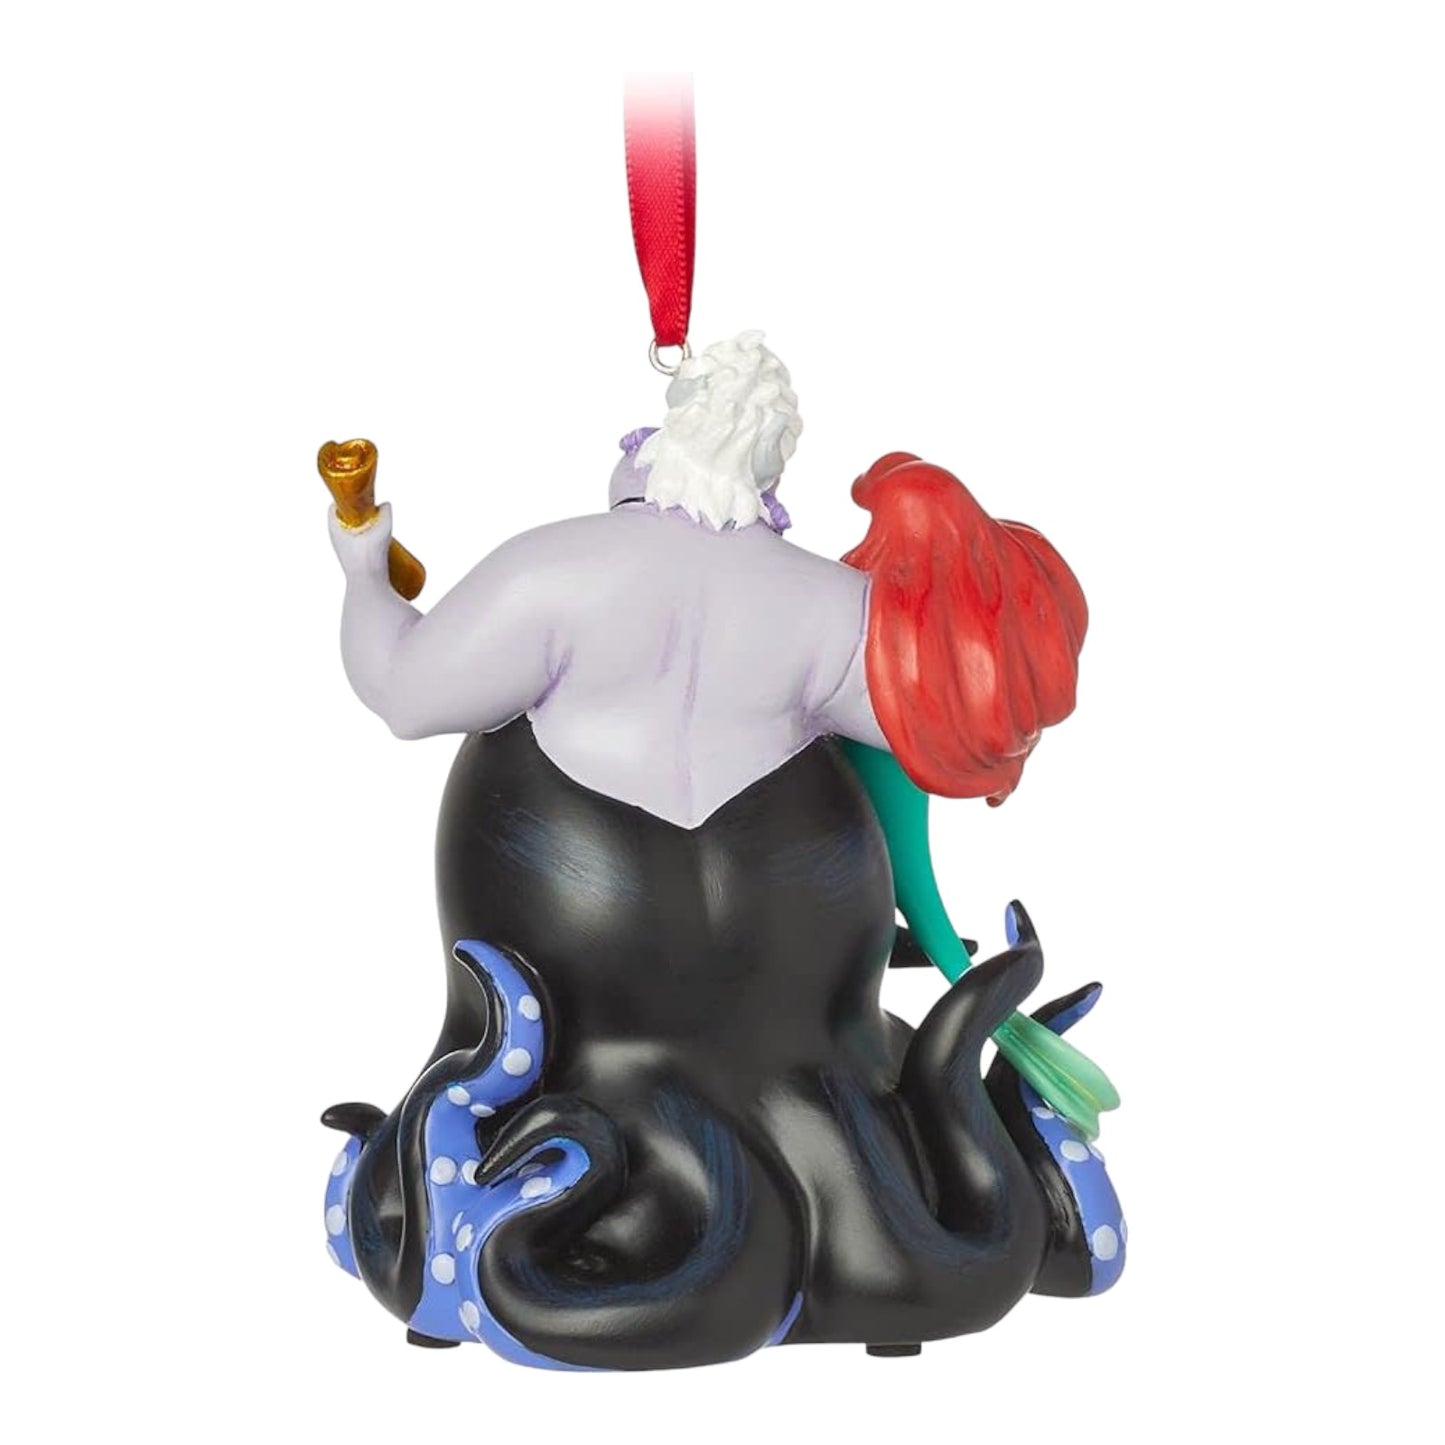 Disney Ariel and Ursula Singing Hanging Ornament - The Little Mermaid